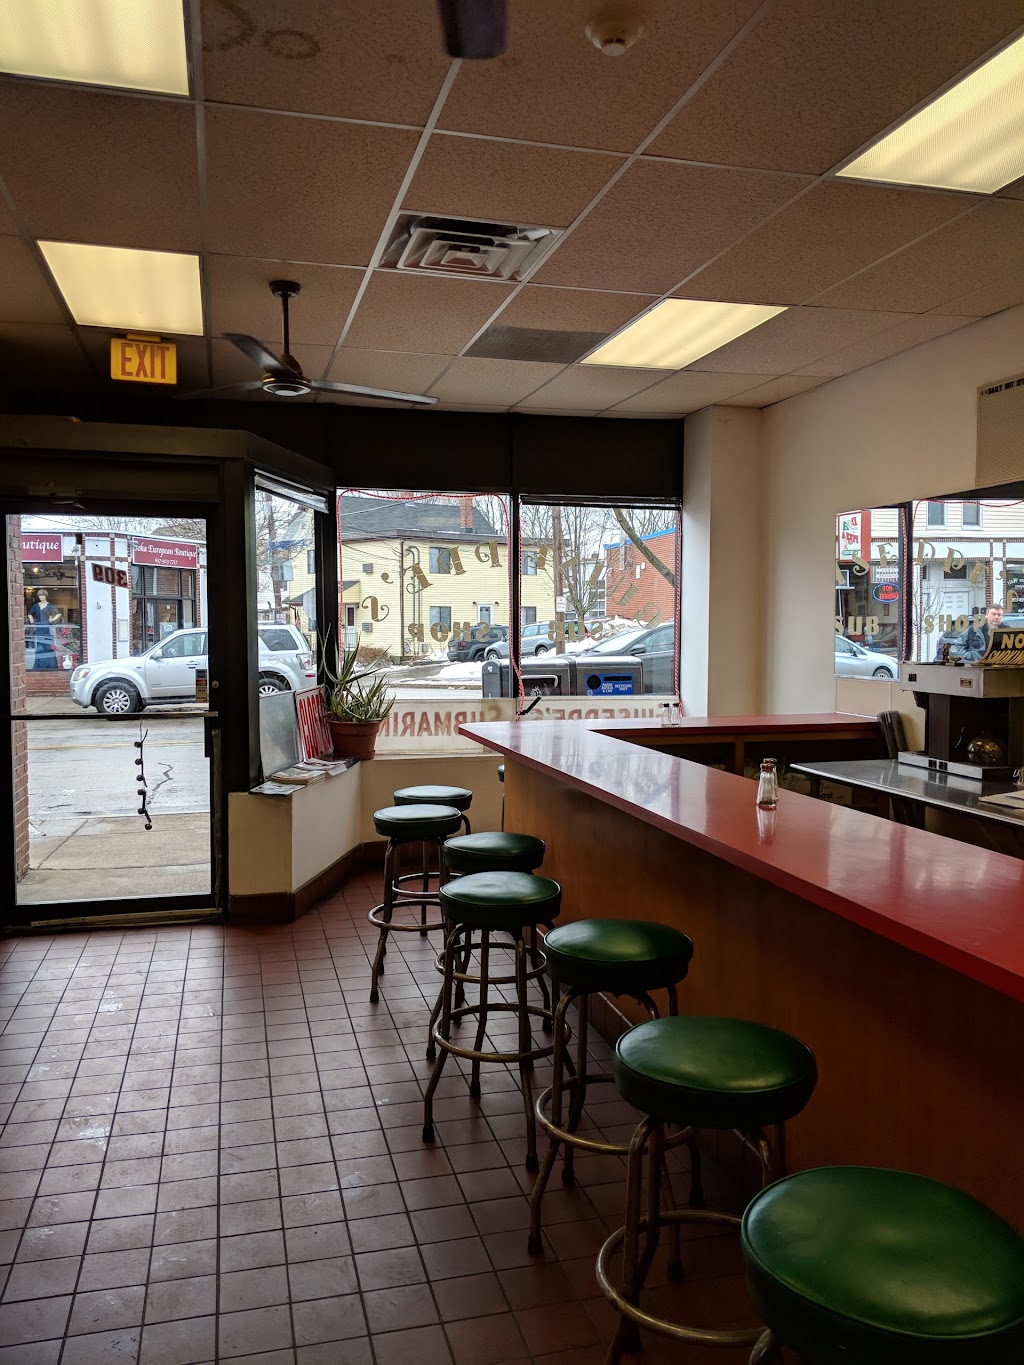 Guiseppes Sub Shop | 309 Watertown St, Newton, MA 02458, USA | Phone: (617) 527-9624